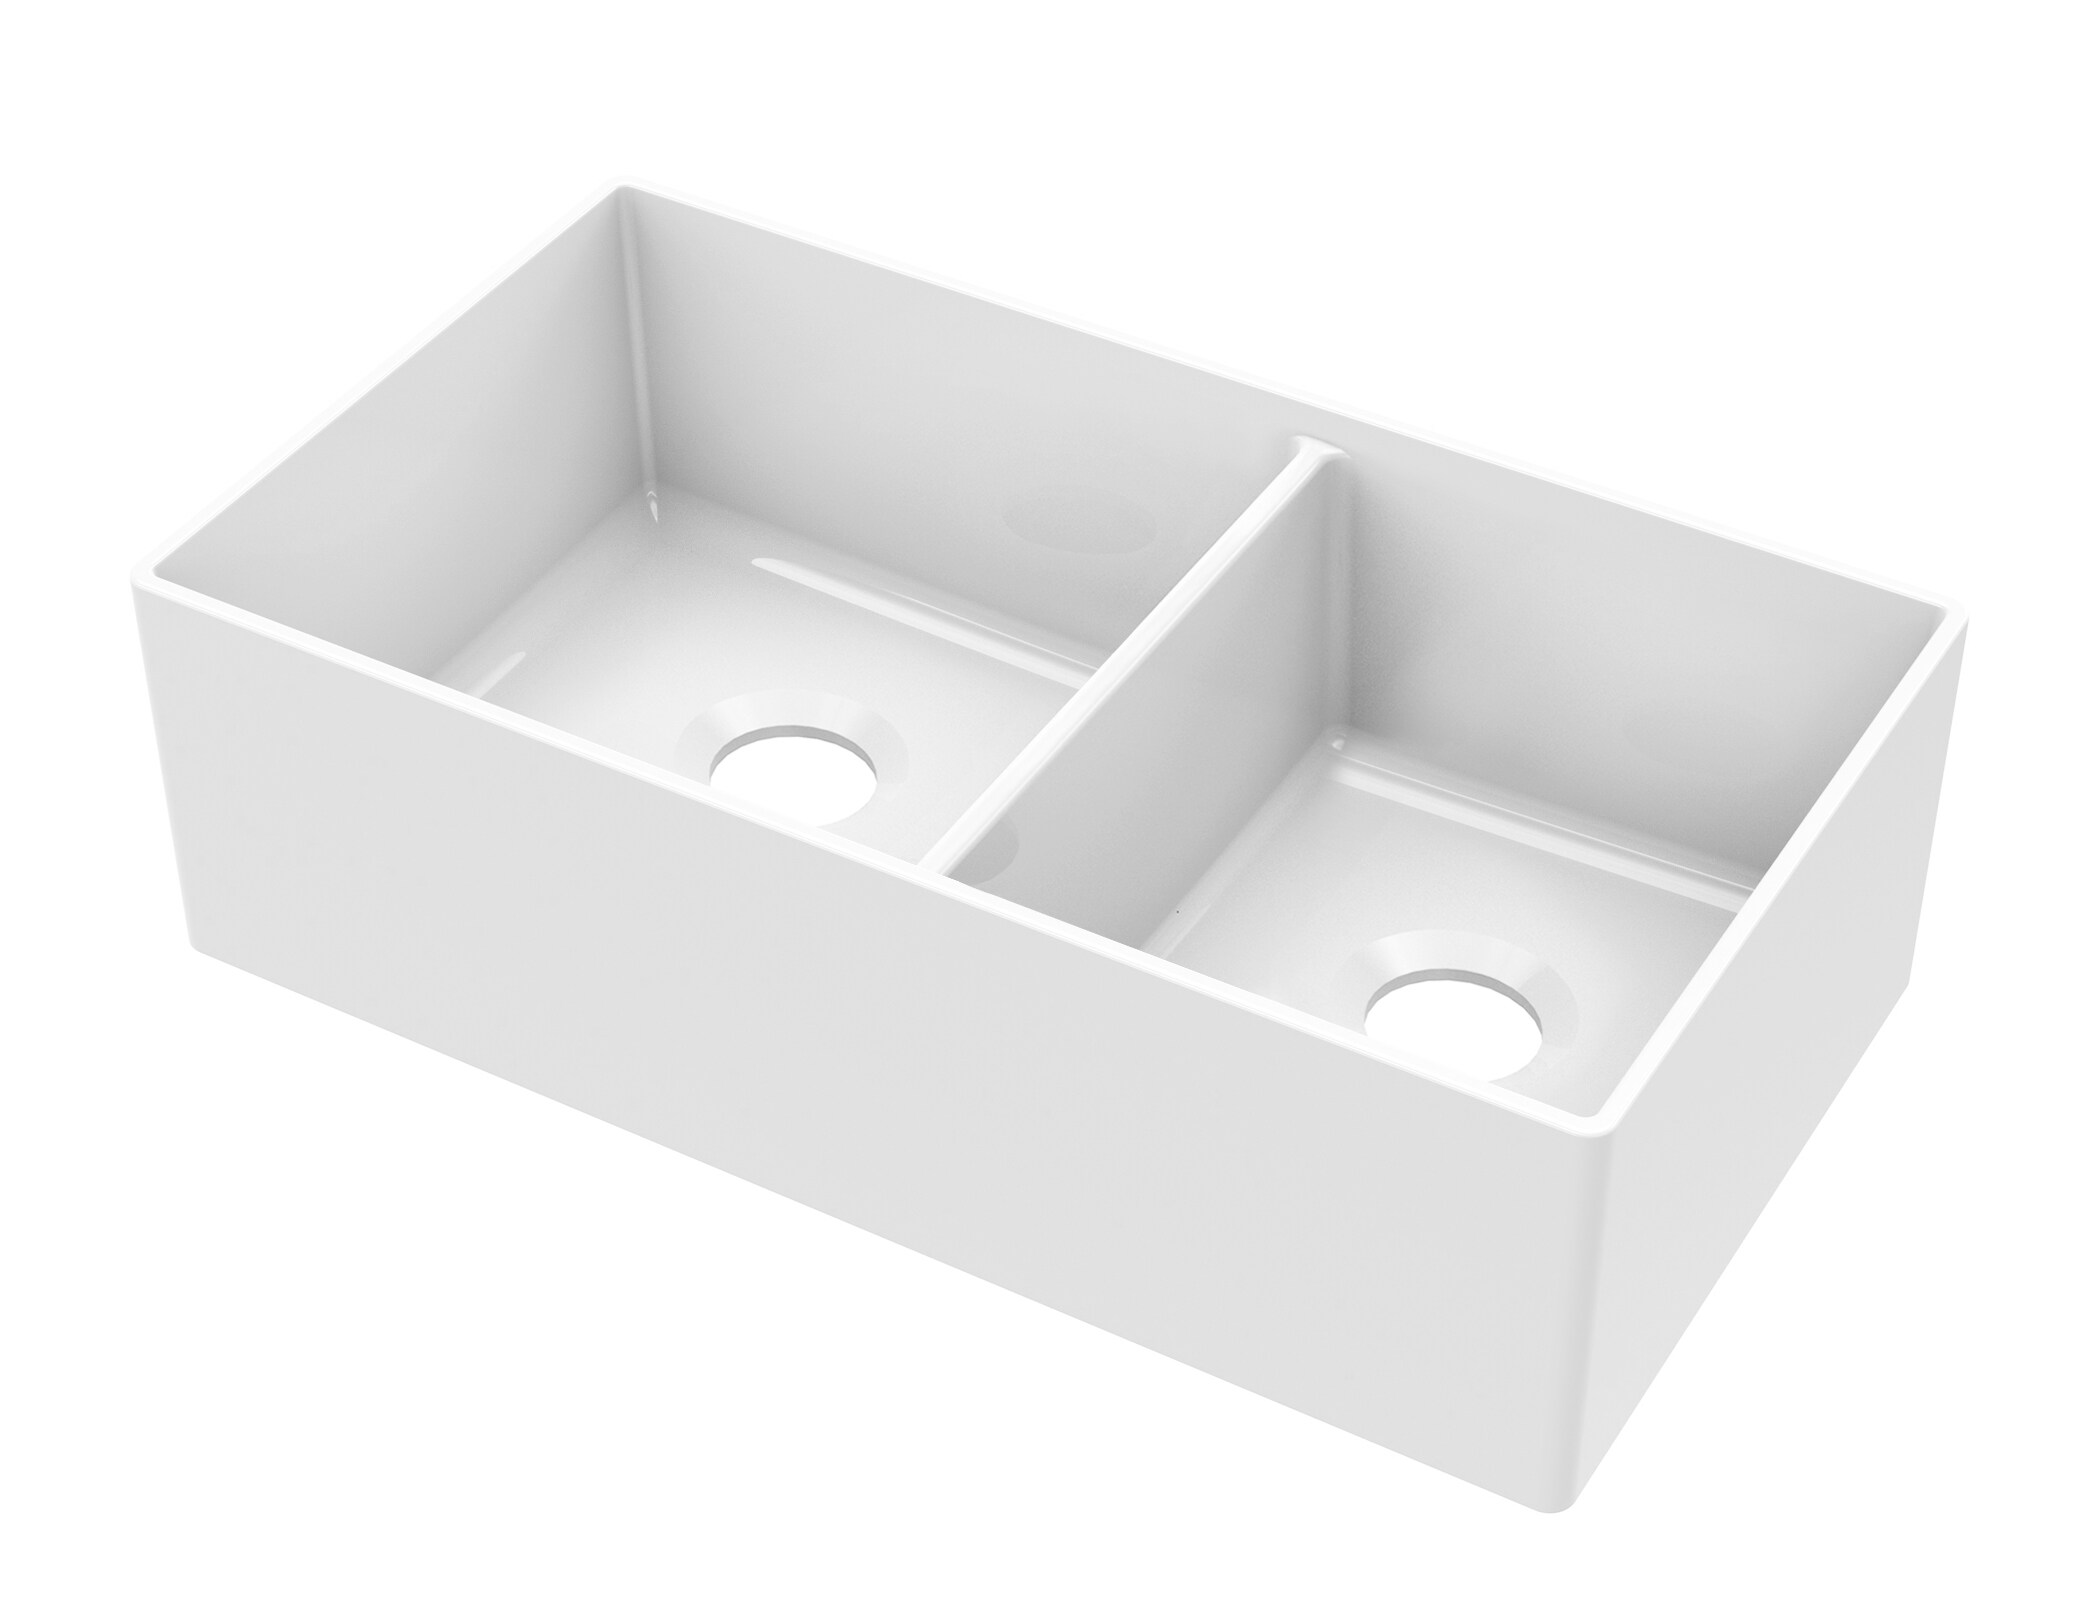 Superior Sinks Farmhouse Apron Front 33-in x 18-in White Double Offset ...